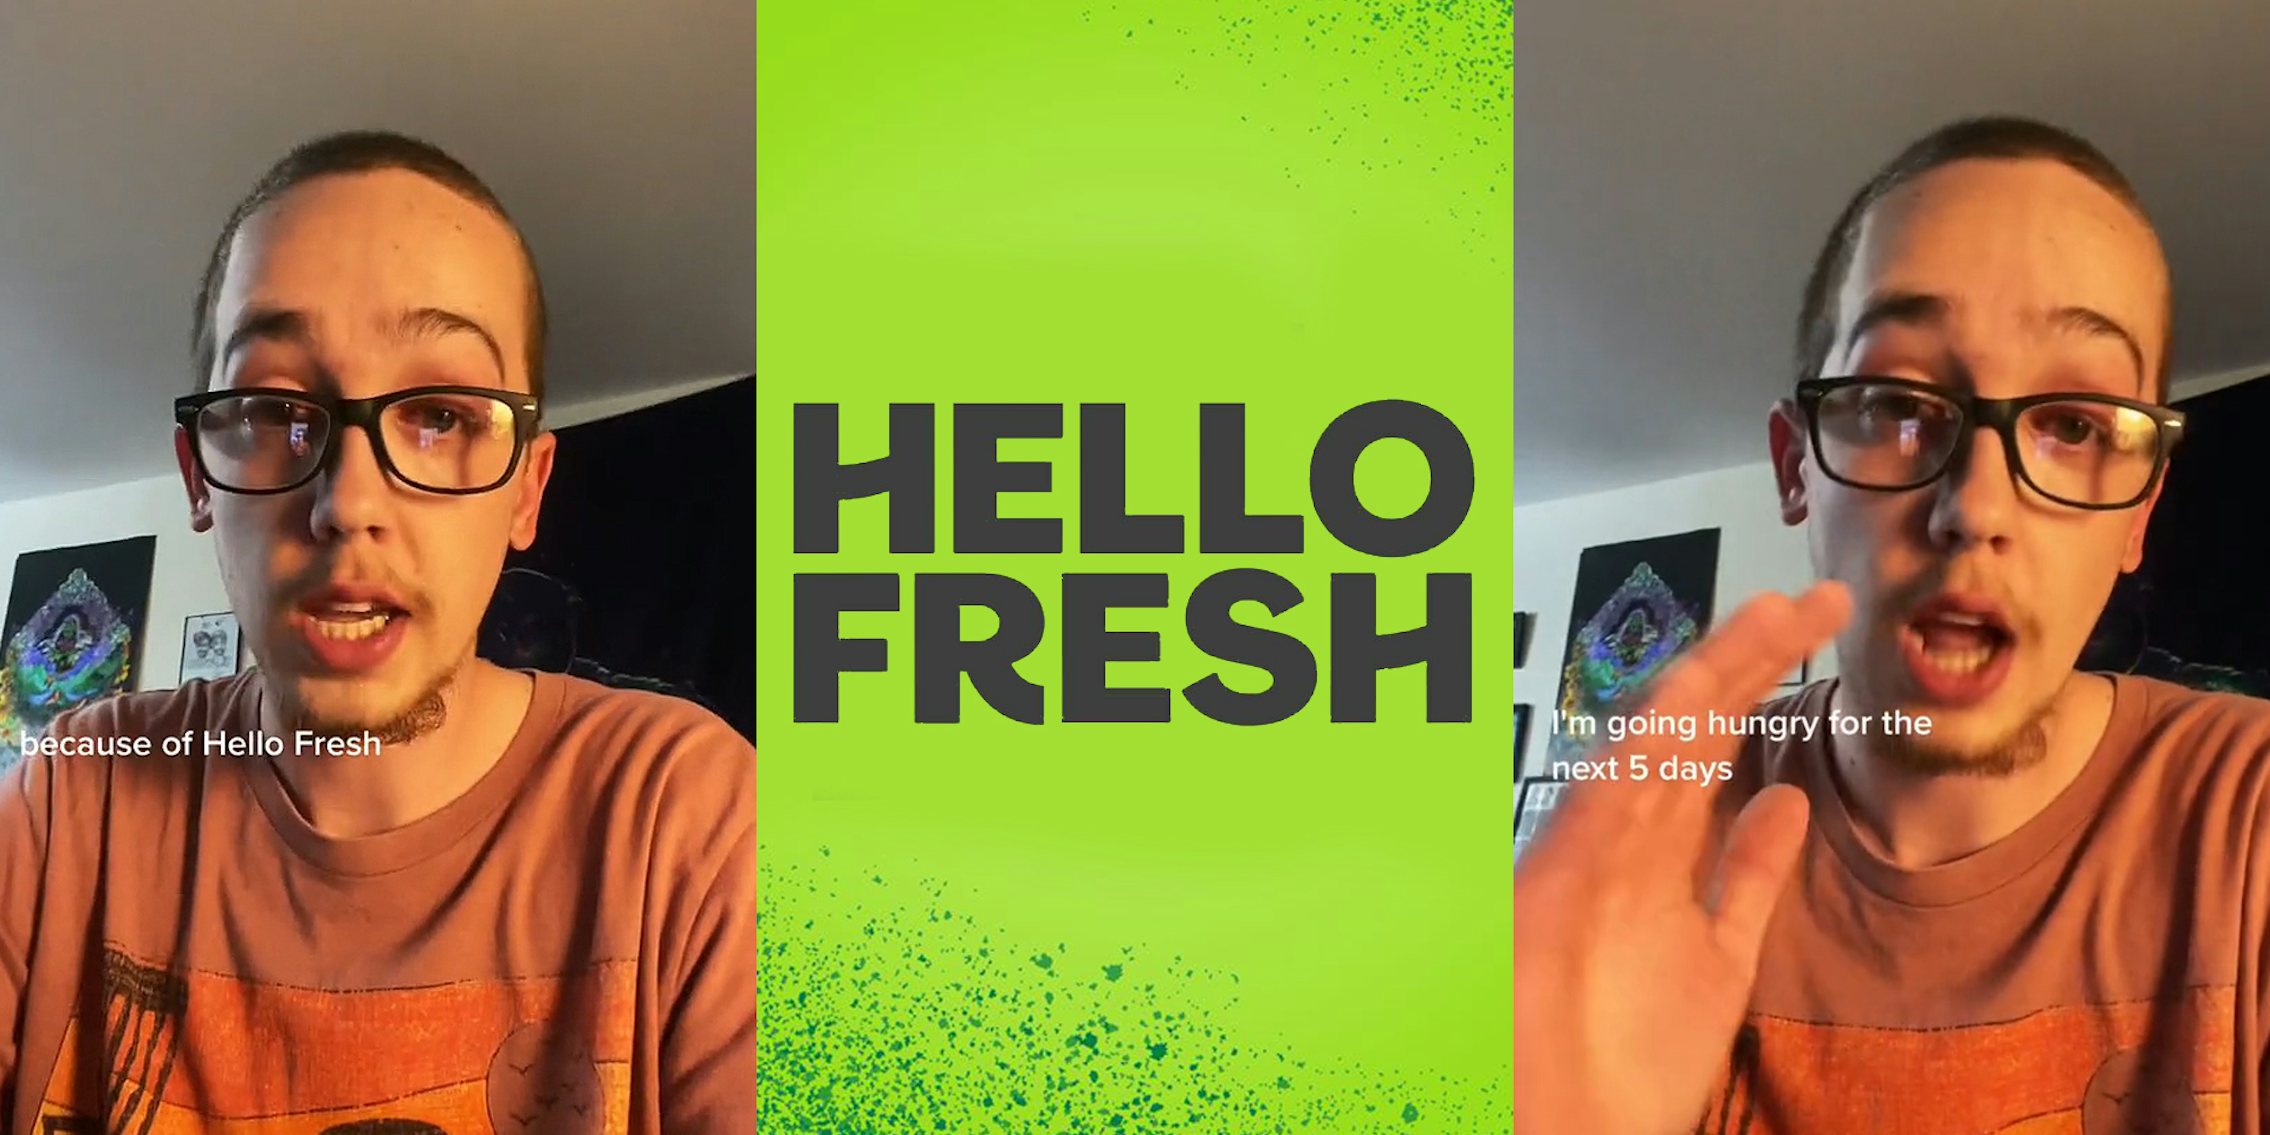 man speaking in front of black curtain and white wall caption 'because of Hello Fresh' (l) Hello Fresh logo on green background (c) man speaking with hand up in front of black curtain and white wall caption 'I'm going hungry for the next 5 days' (r)